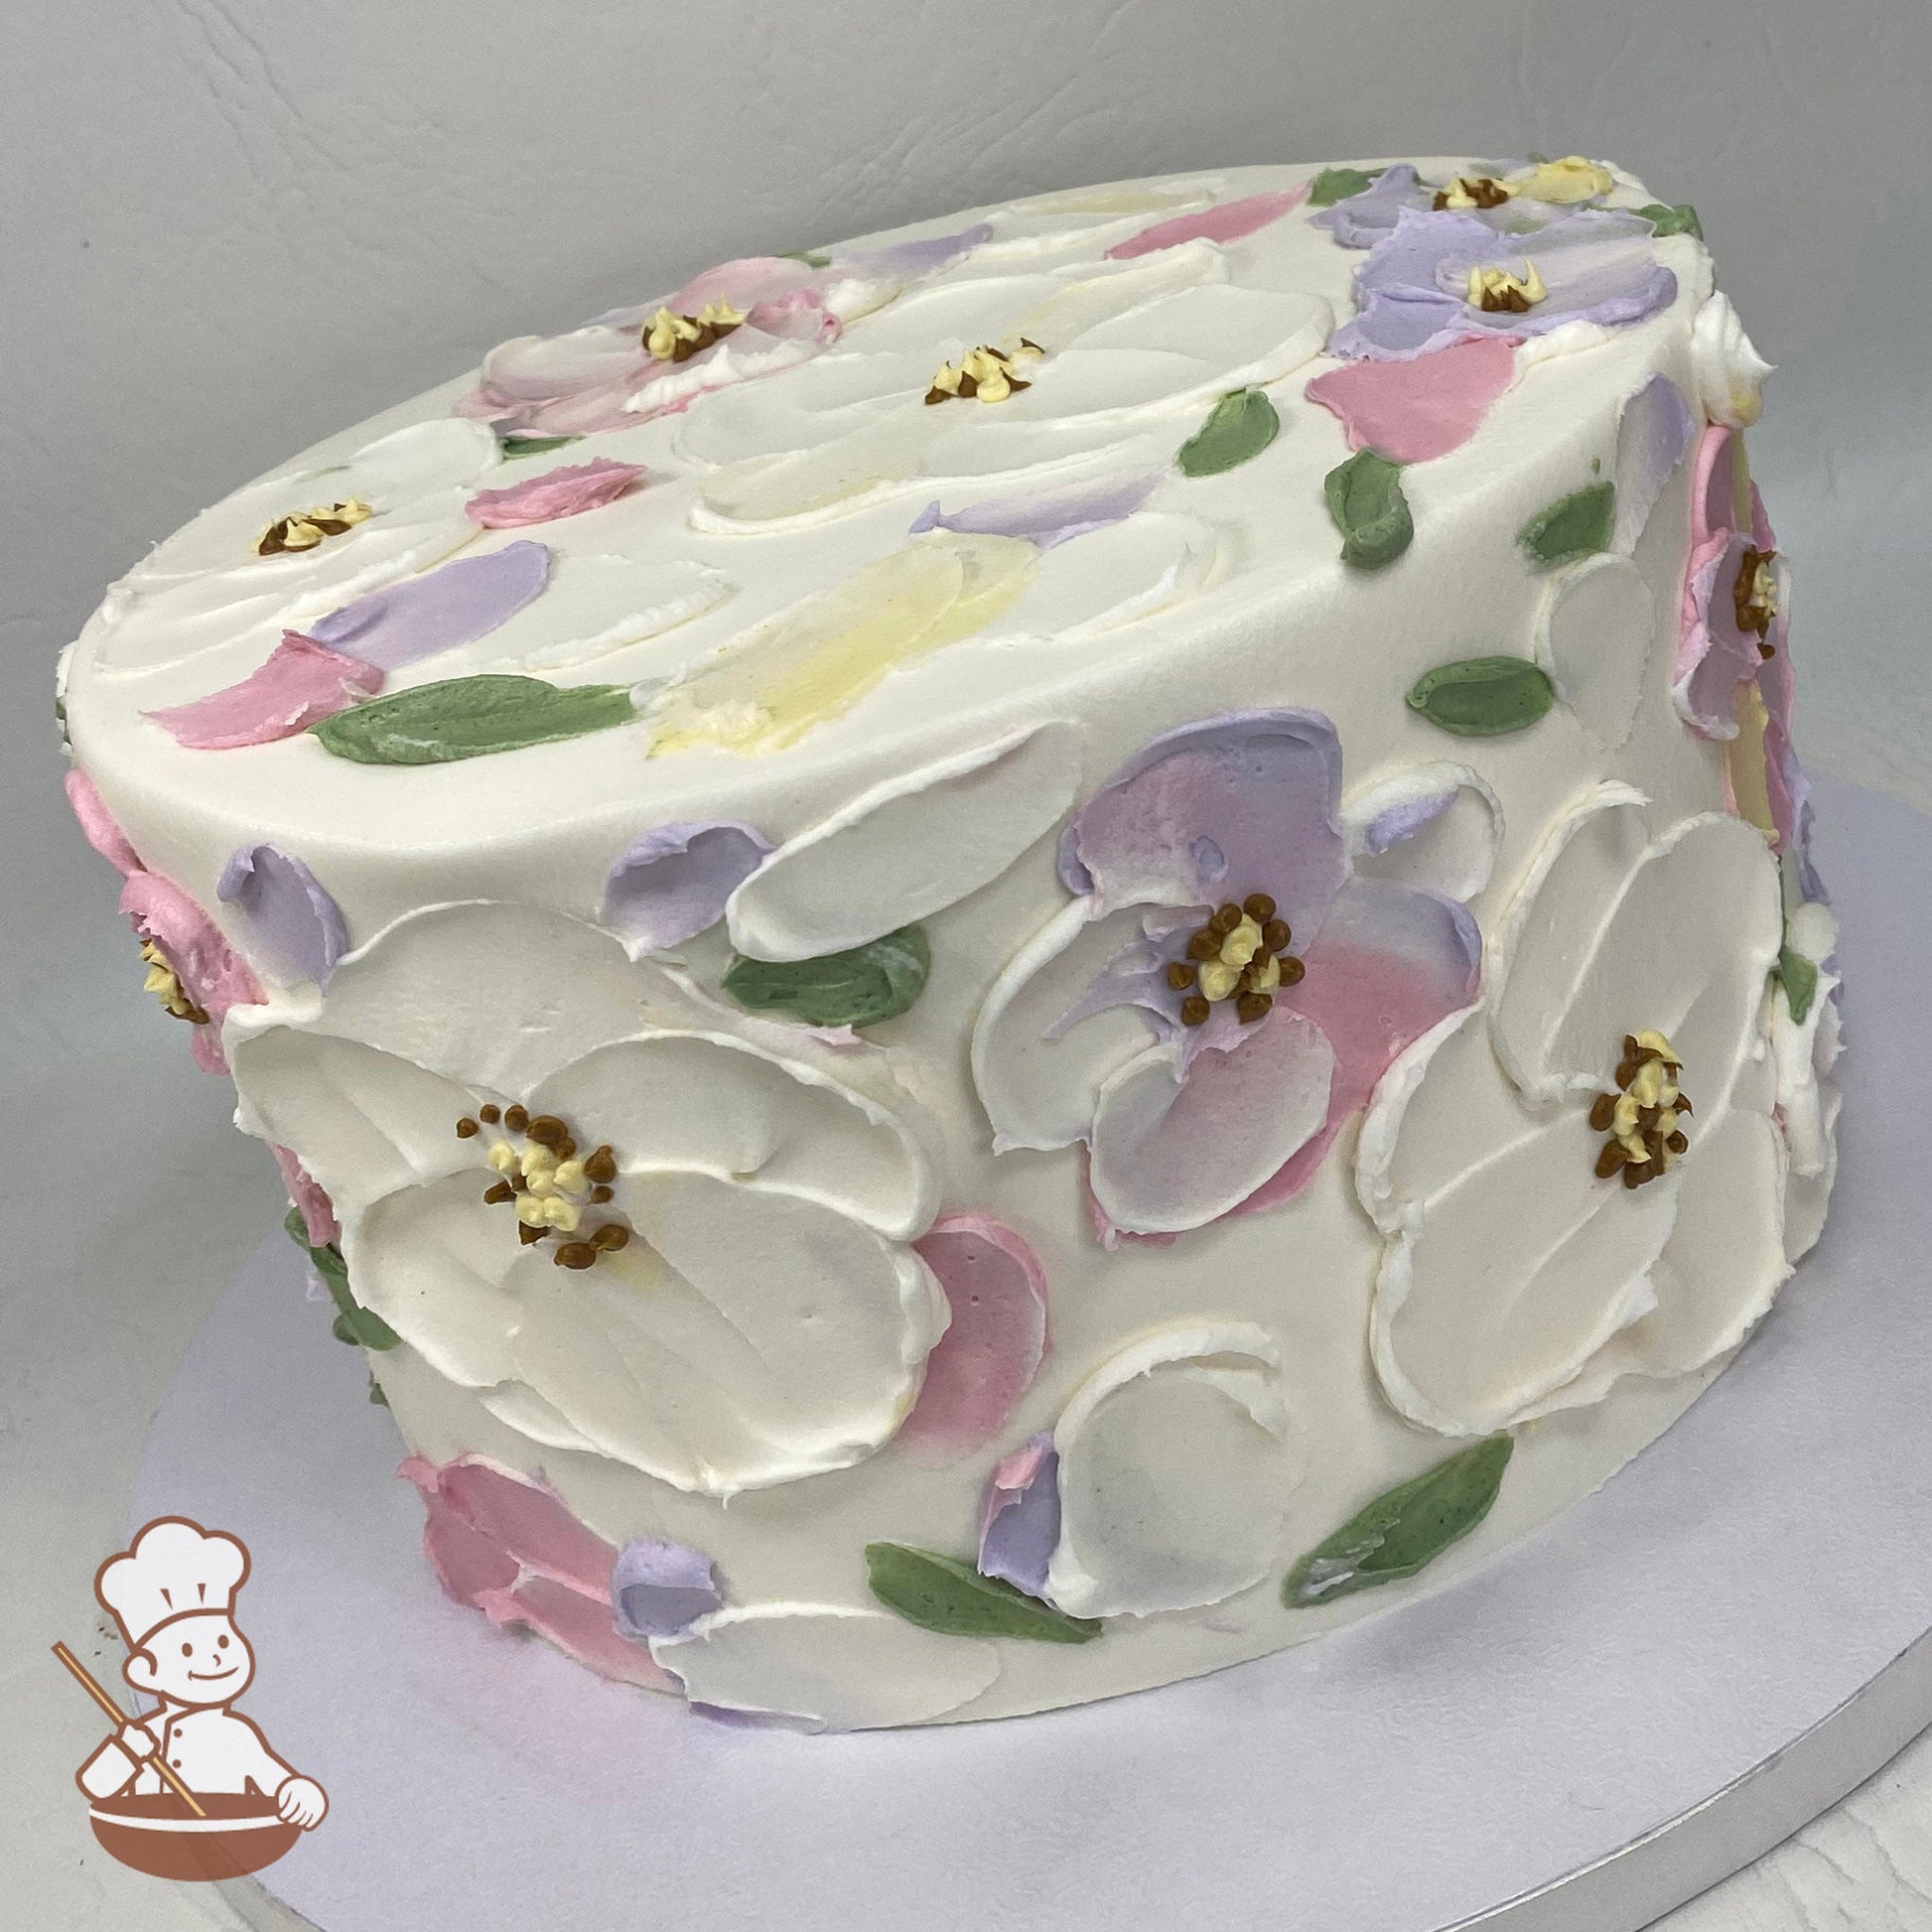 Single tier cake with smooth white icing, decorated with lavender, mauve and white palette knife flowers.